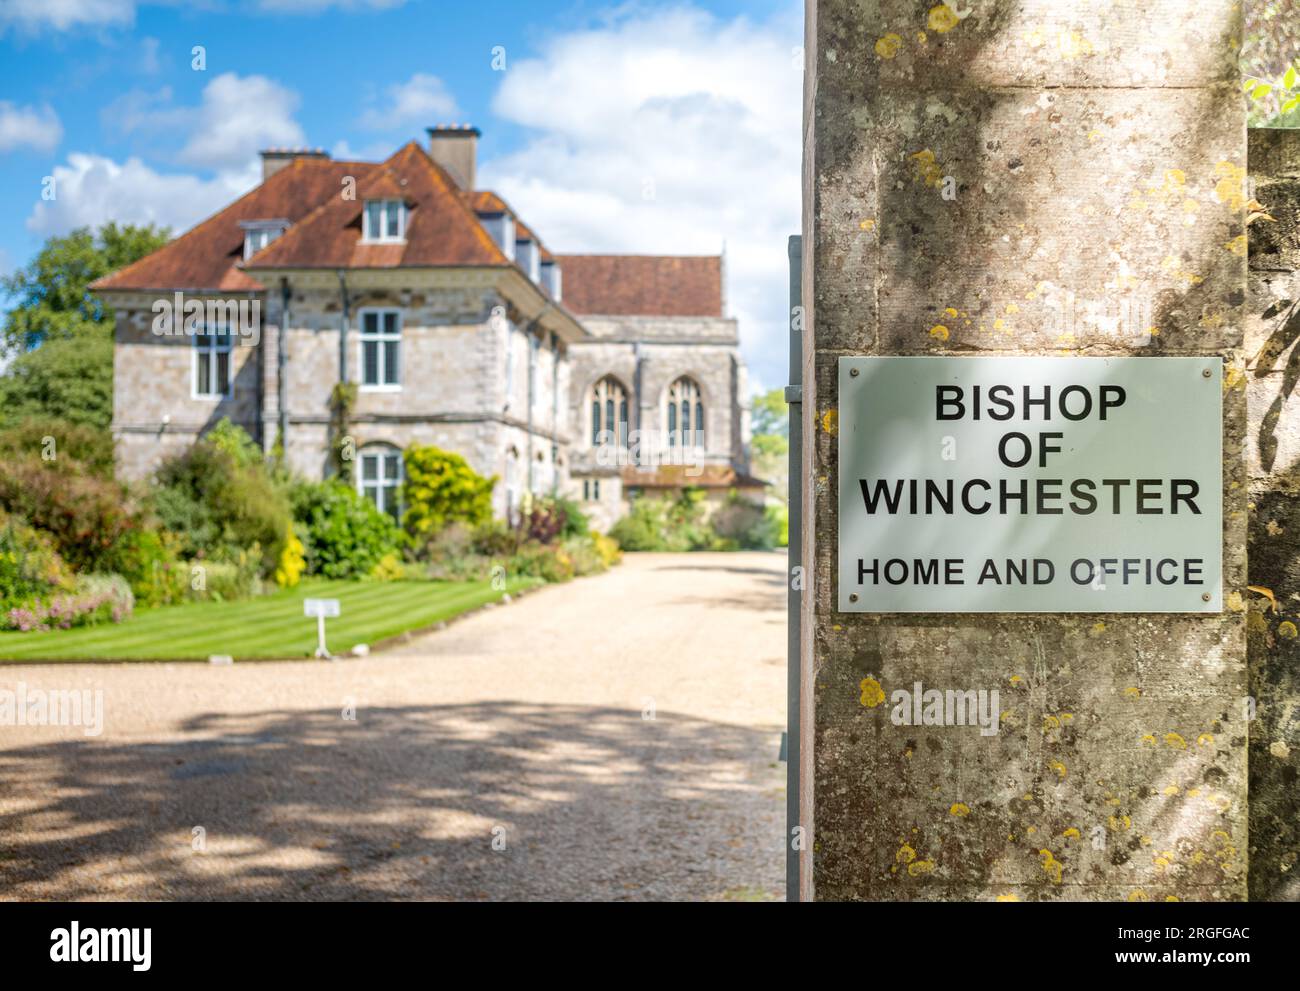 A sign at the the entrance to 'New' Wolvesey Palace, or Bishop's House, the official residence and office of the Bishop of Winchester, in Winchester, Stock Photo